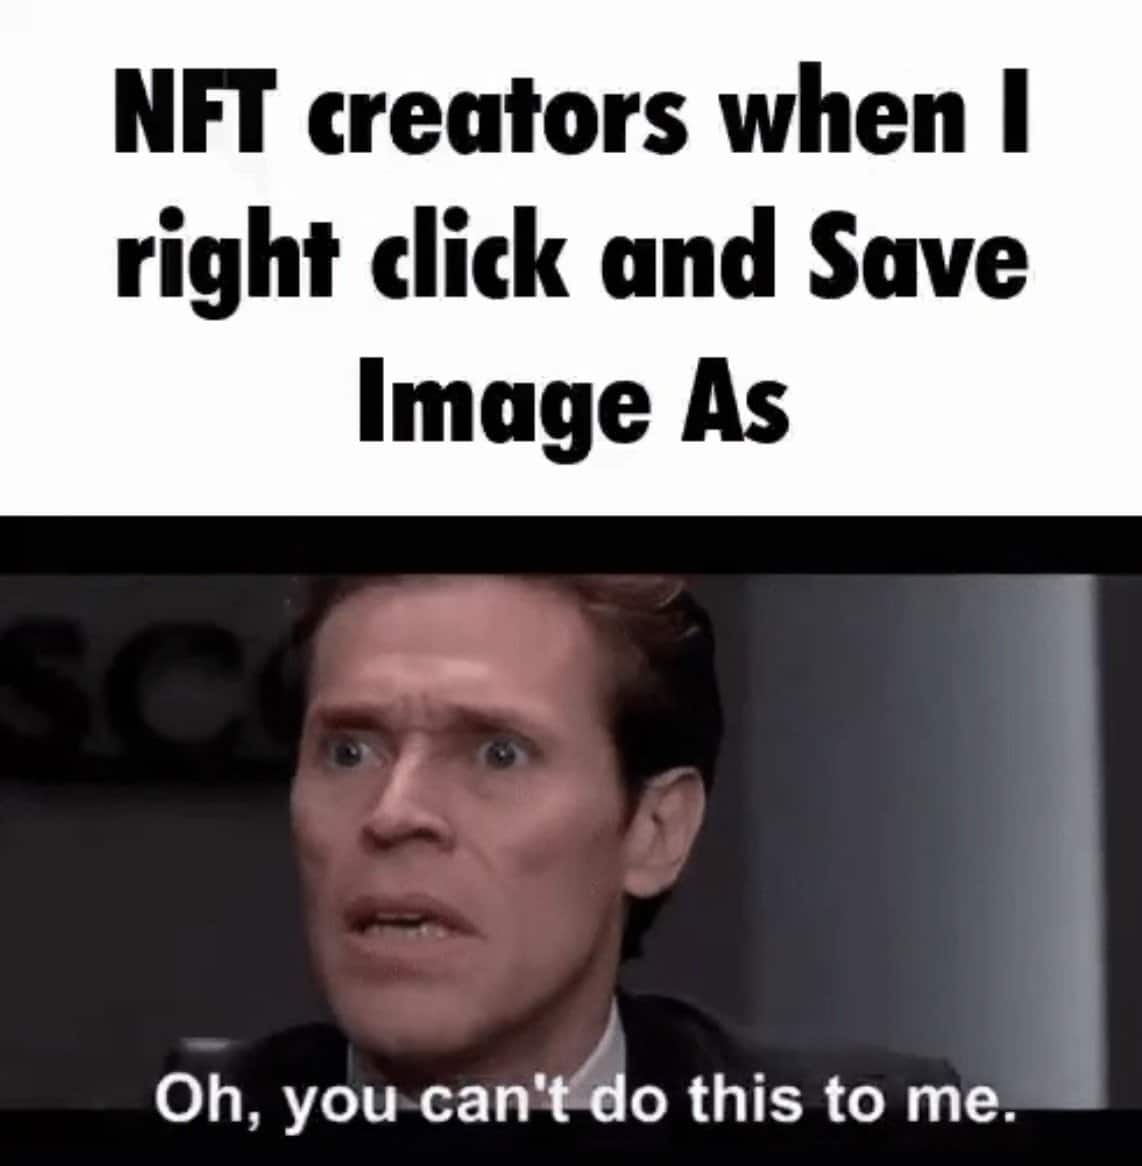 meme featuring Willem Dafoe's character from Spiderman saying "Oh, you can't do this to me."